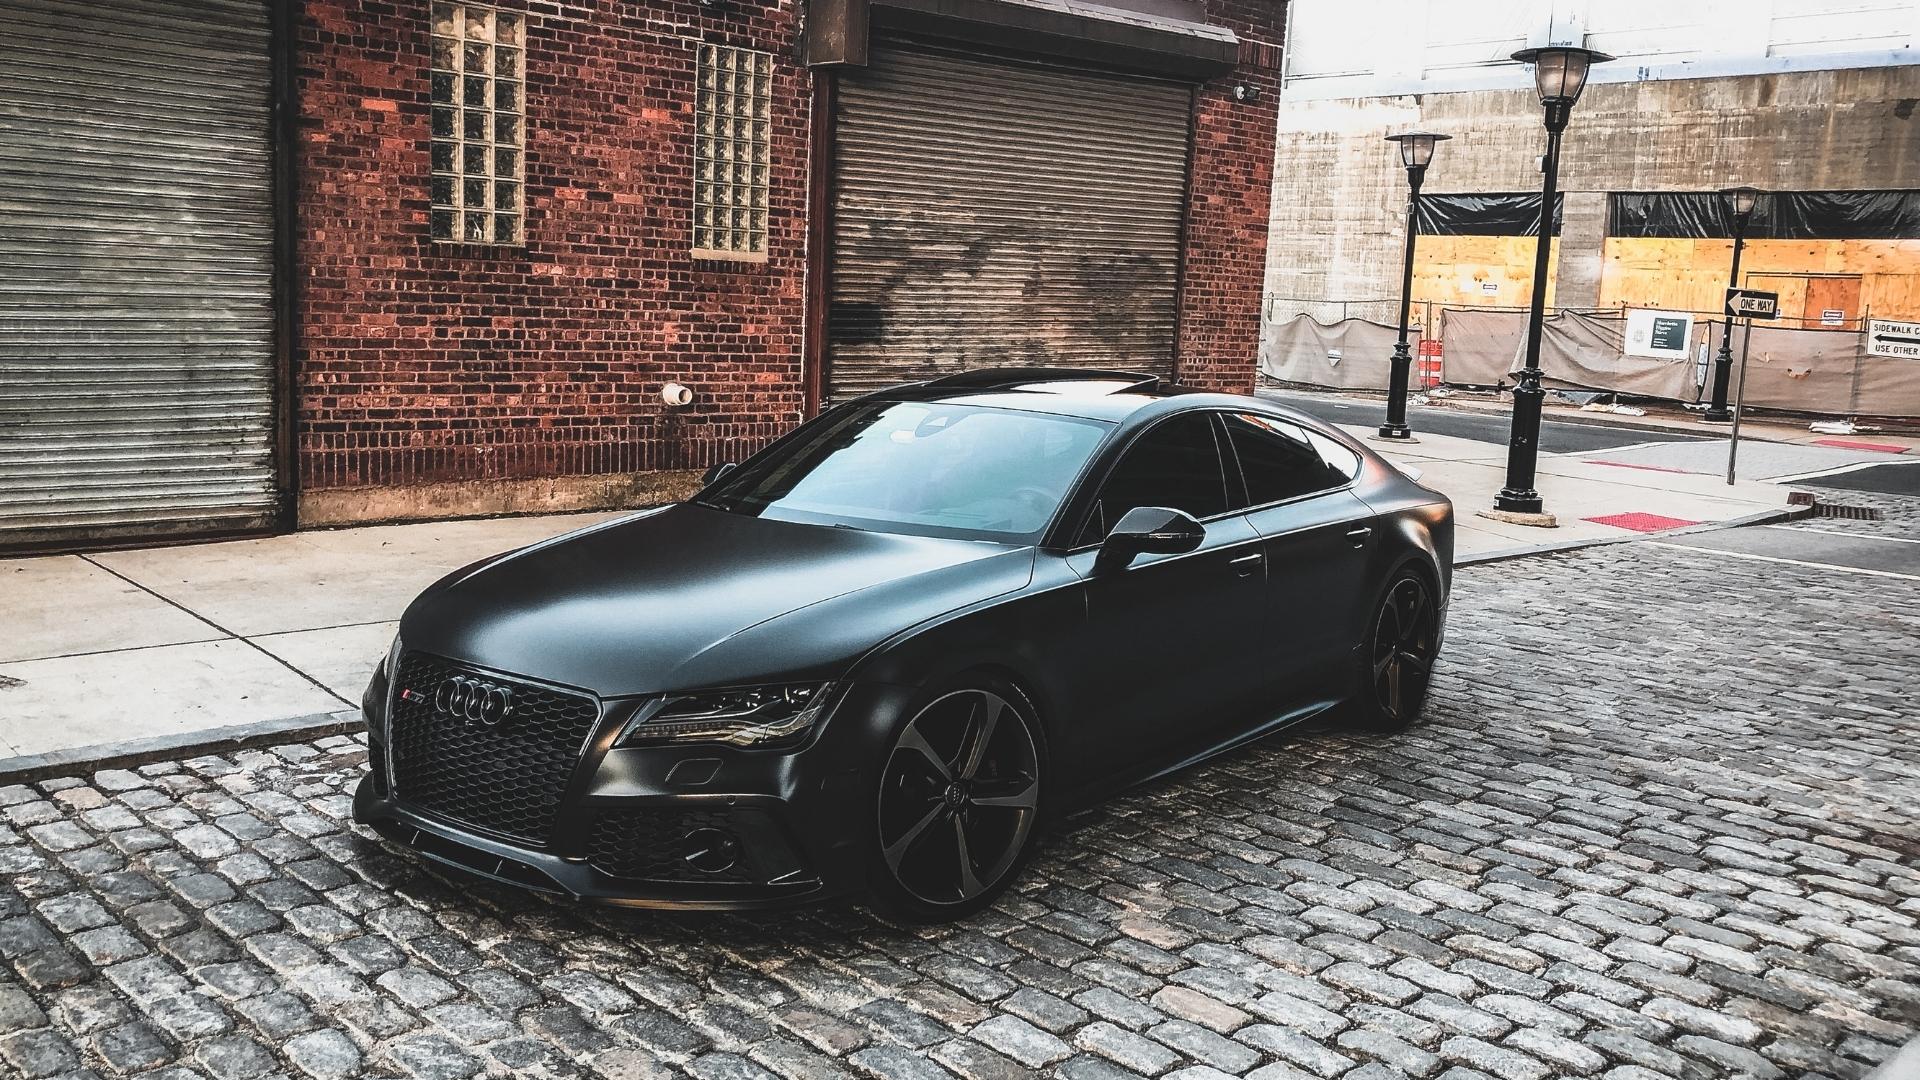 Black wrapped Audi on the brick road, sporty car